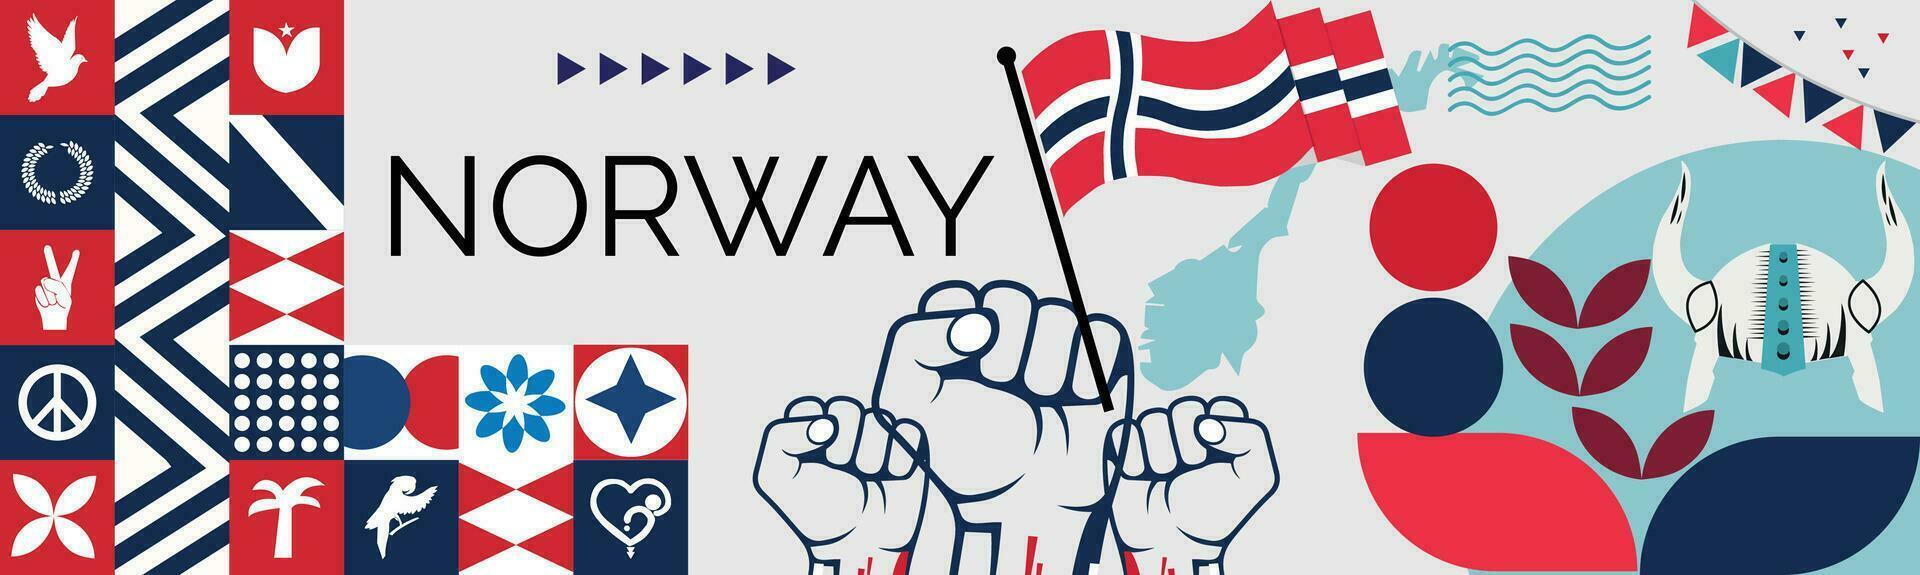 Norway national day banner design. Norwegian flag and map theme with Oslo Viking helmet background. Template vector Norway flag modern design. Abstract geometric retro shapes of red and blue color.